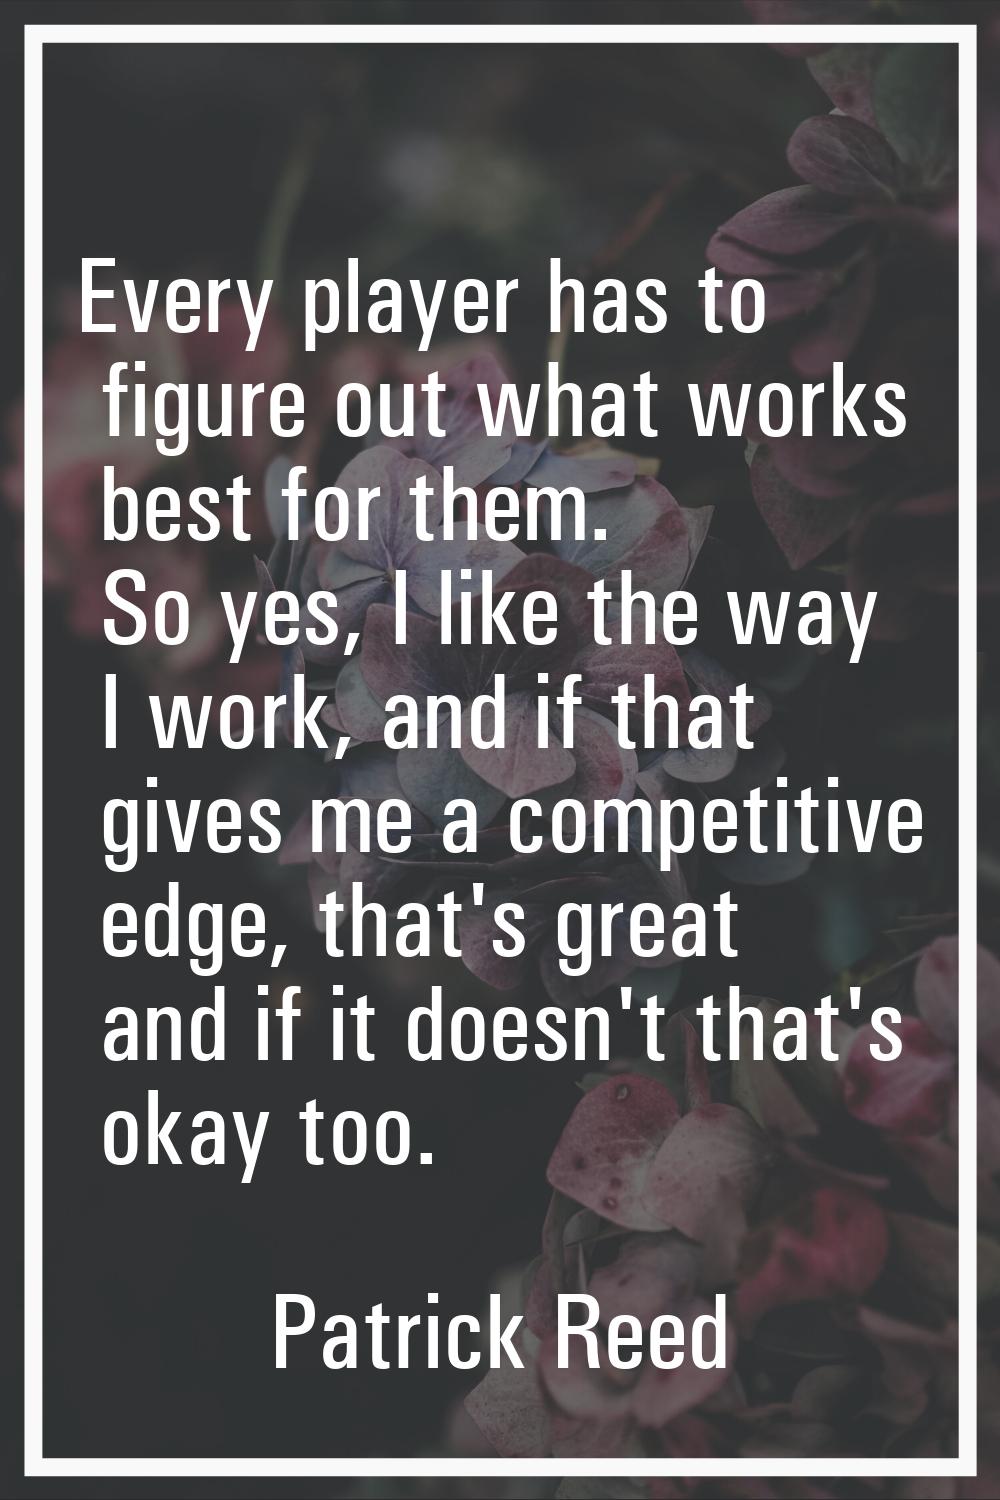 Every player has to figure out what works best for them. So yes, I like the way I work, and if that